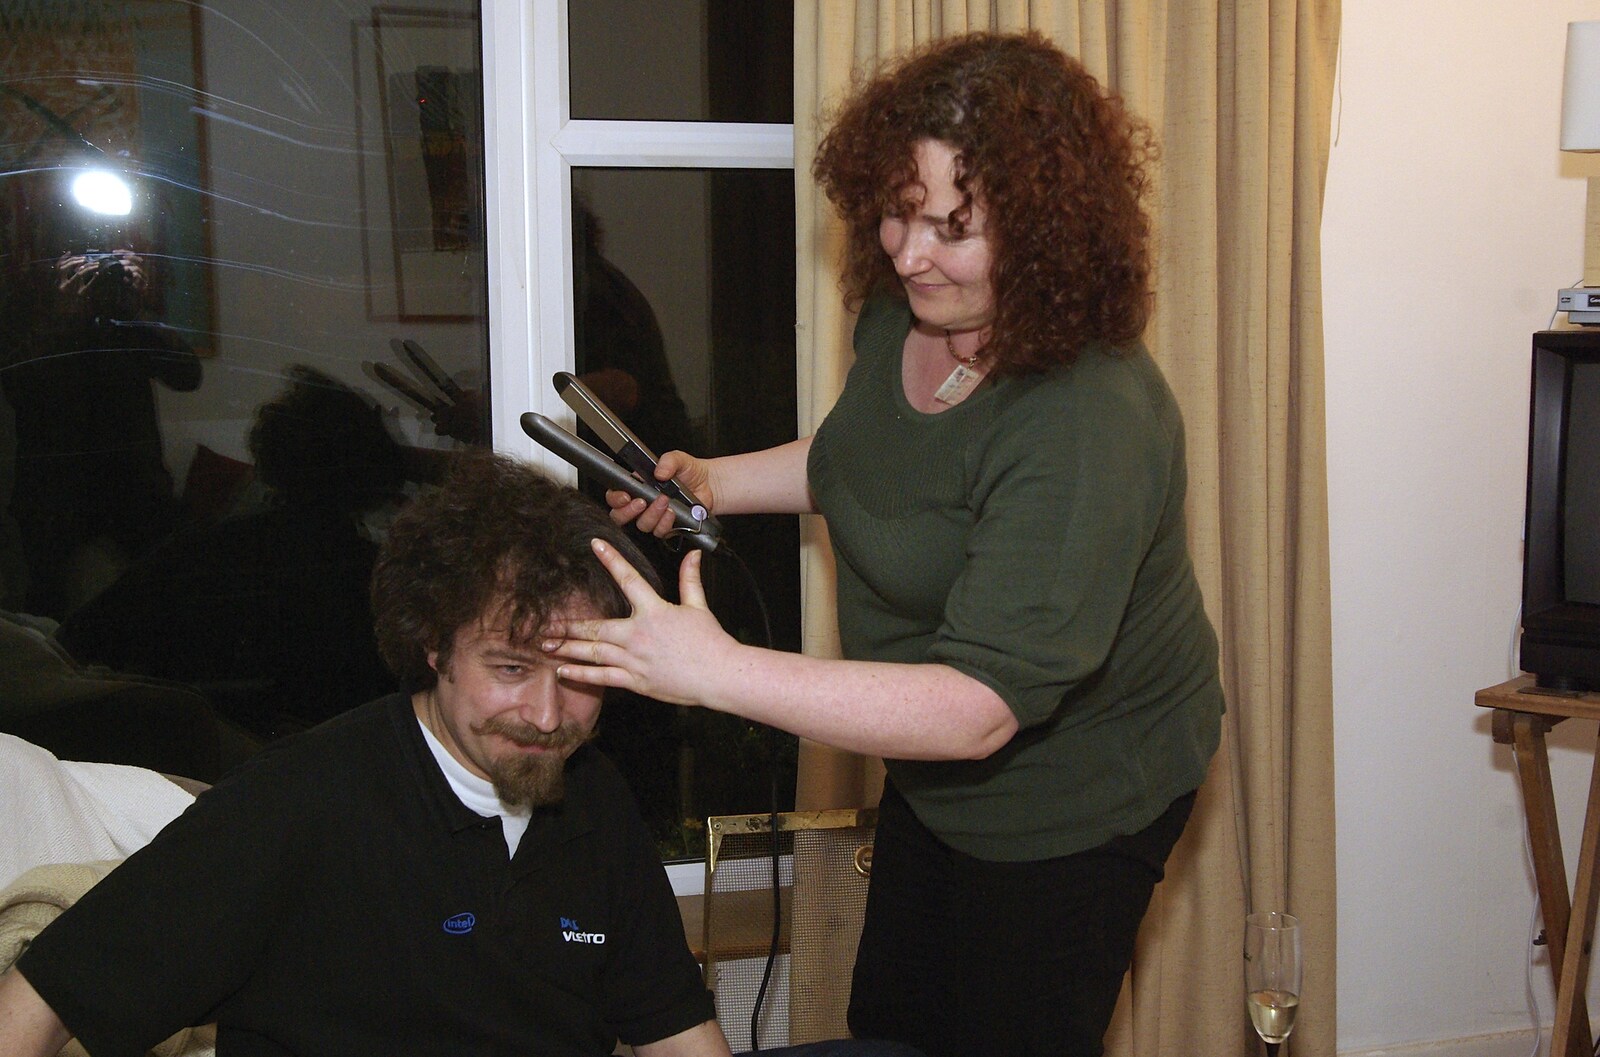 Noddy gets his hair straightened from Easter in Dublin, Ireland - 21st March 2008